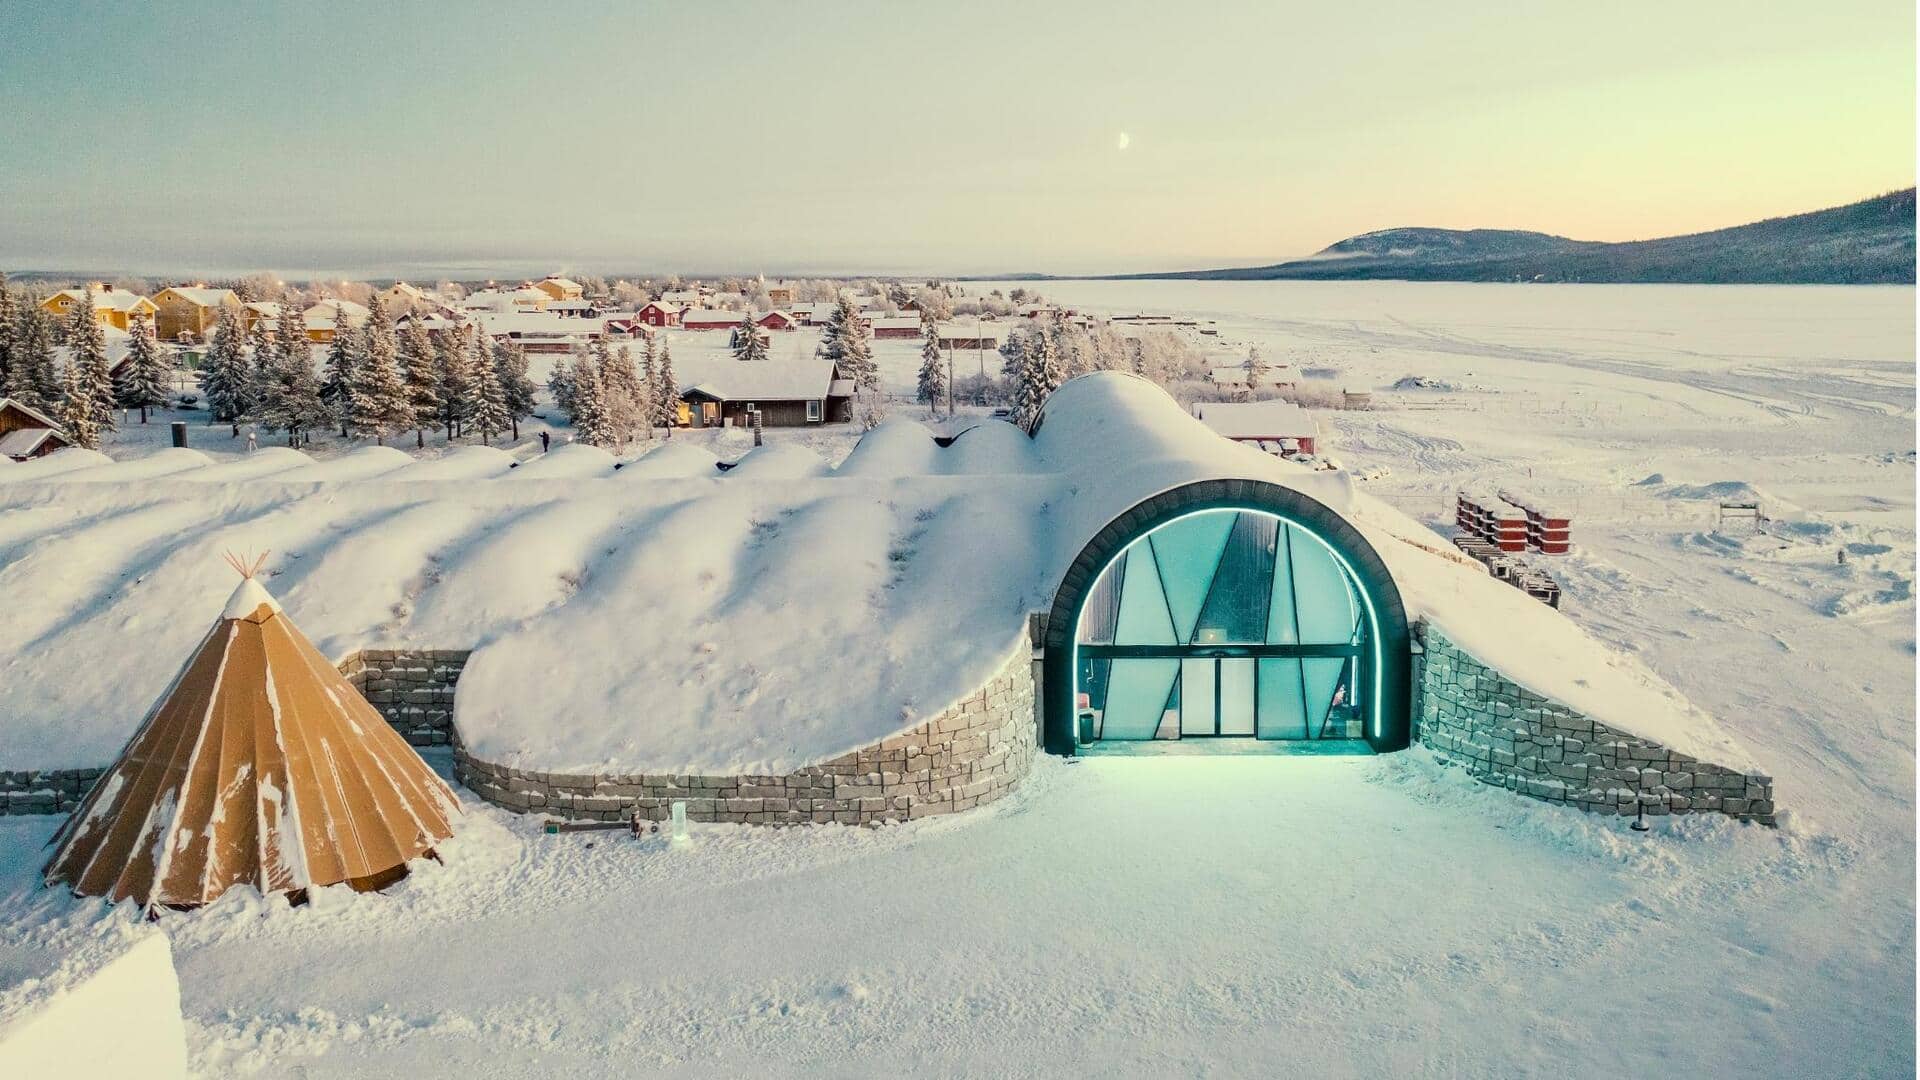 When in Sweden, stay at the unique Ice Hotel